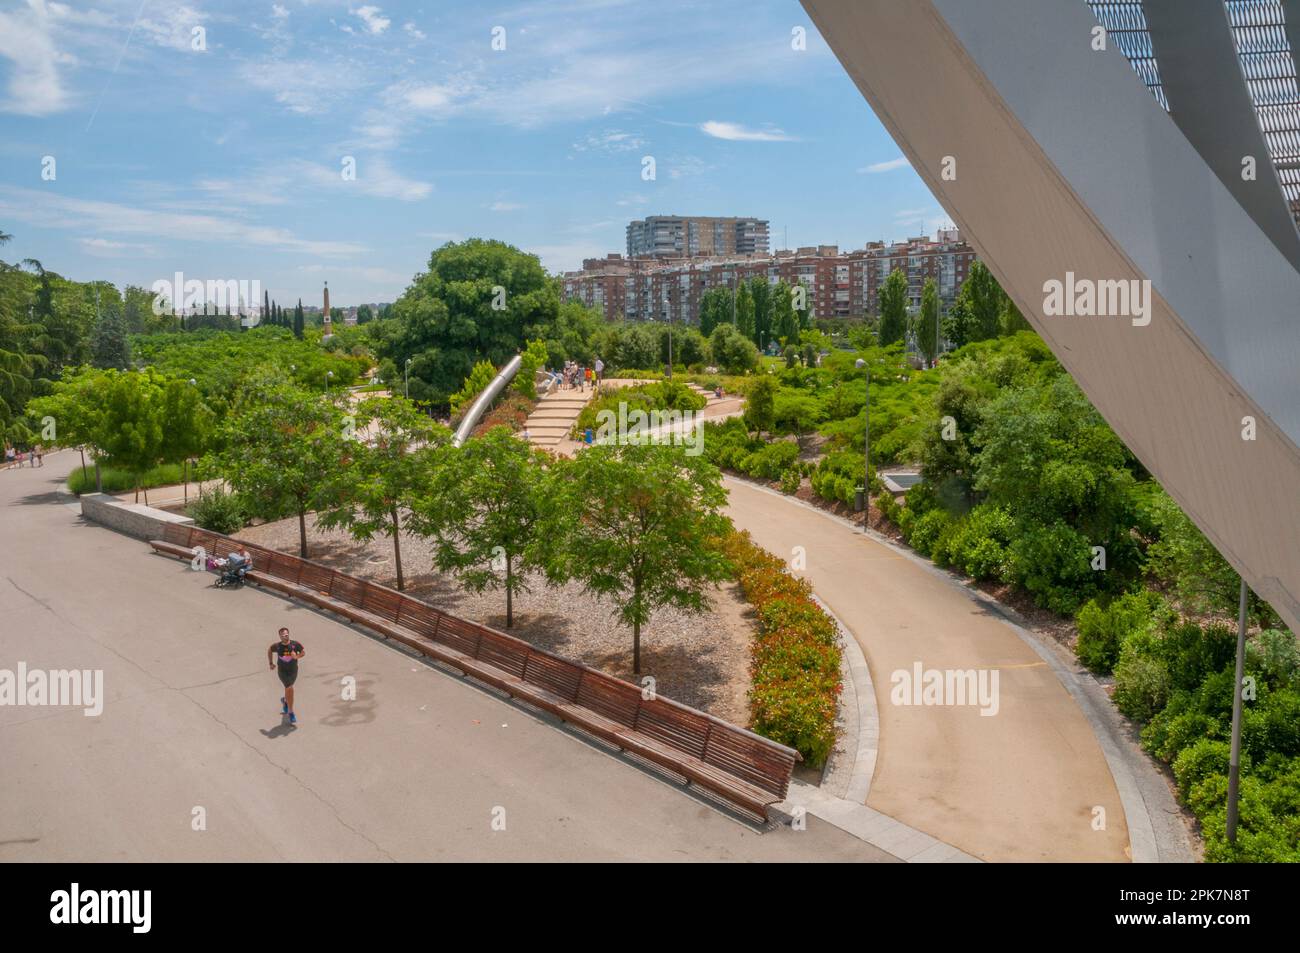 Overview. Madrid Rio park, Madrid, Spain. Stock Photo